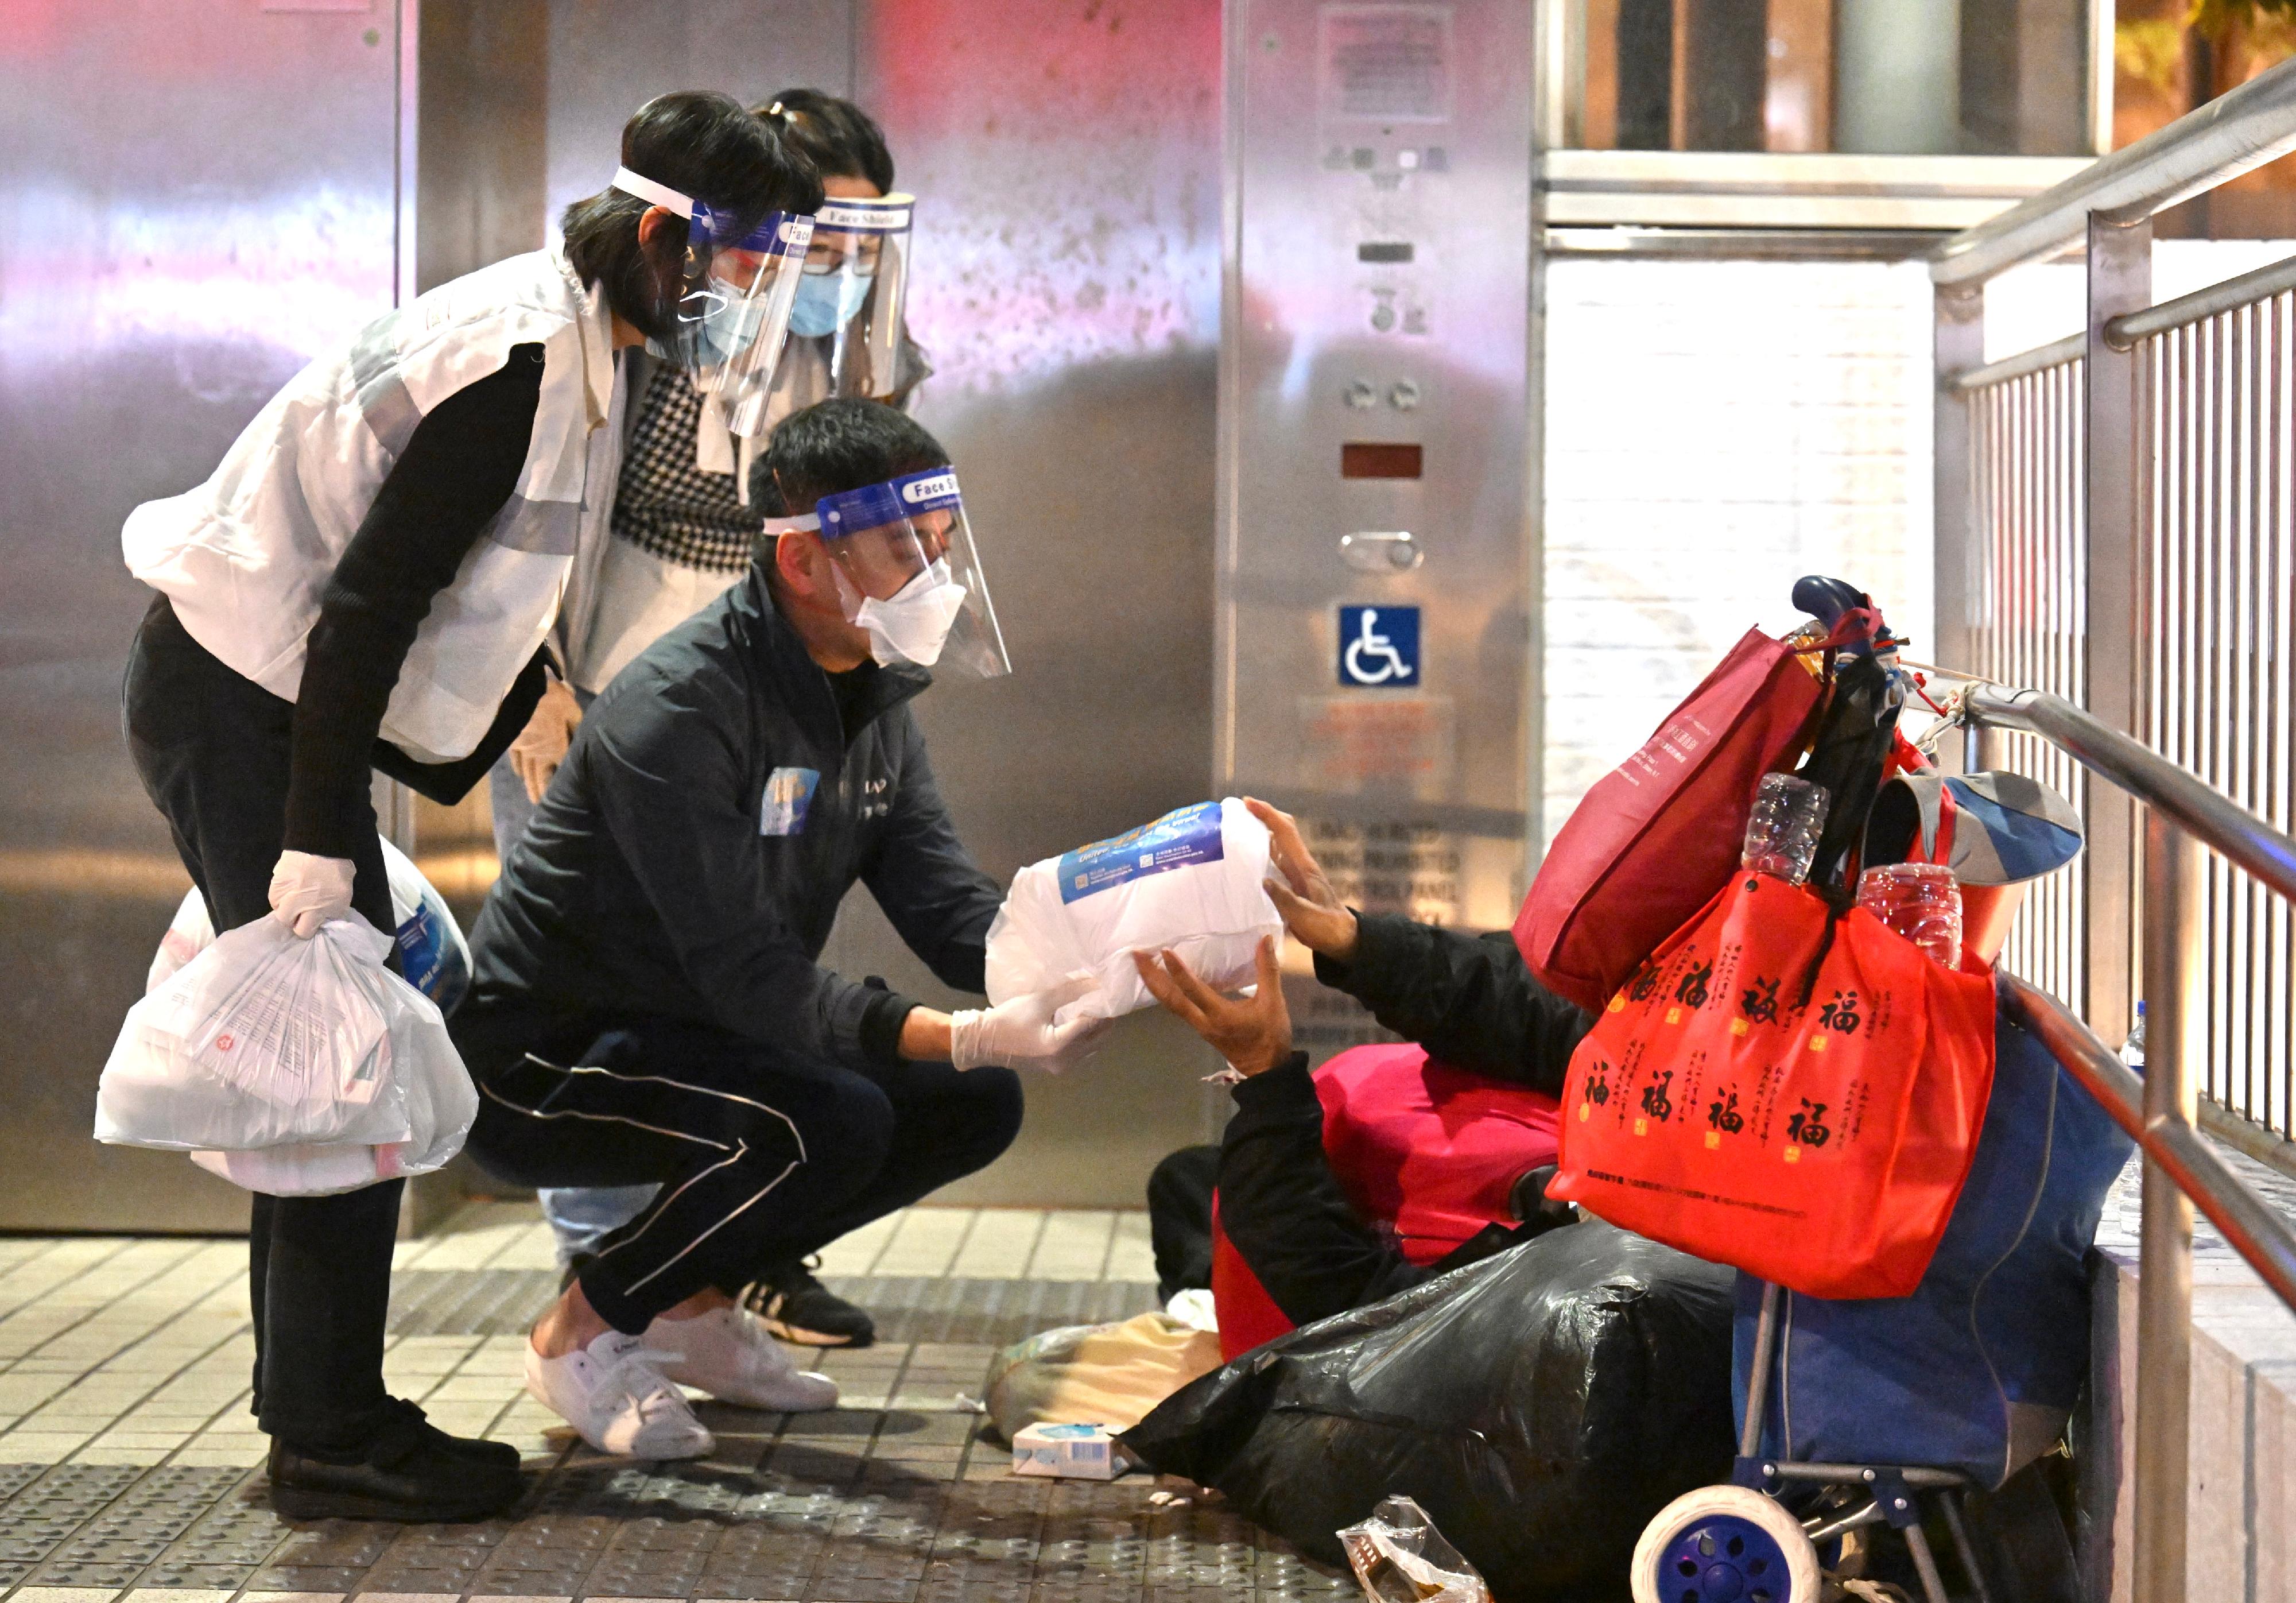 The Sham Shui Po District Office and the Yau Tsim Mong District Office, together with non-governmental organisations, distributed anti-epidemic service bags to street sleepers on April 4. Picture shows the District Officer (Yau Tsim Mong), Mr Edward Yu, distributing an anit-epidemic service bag to a street sleeper.